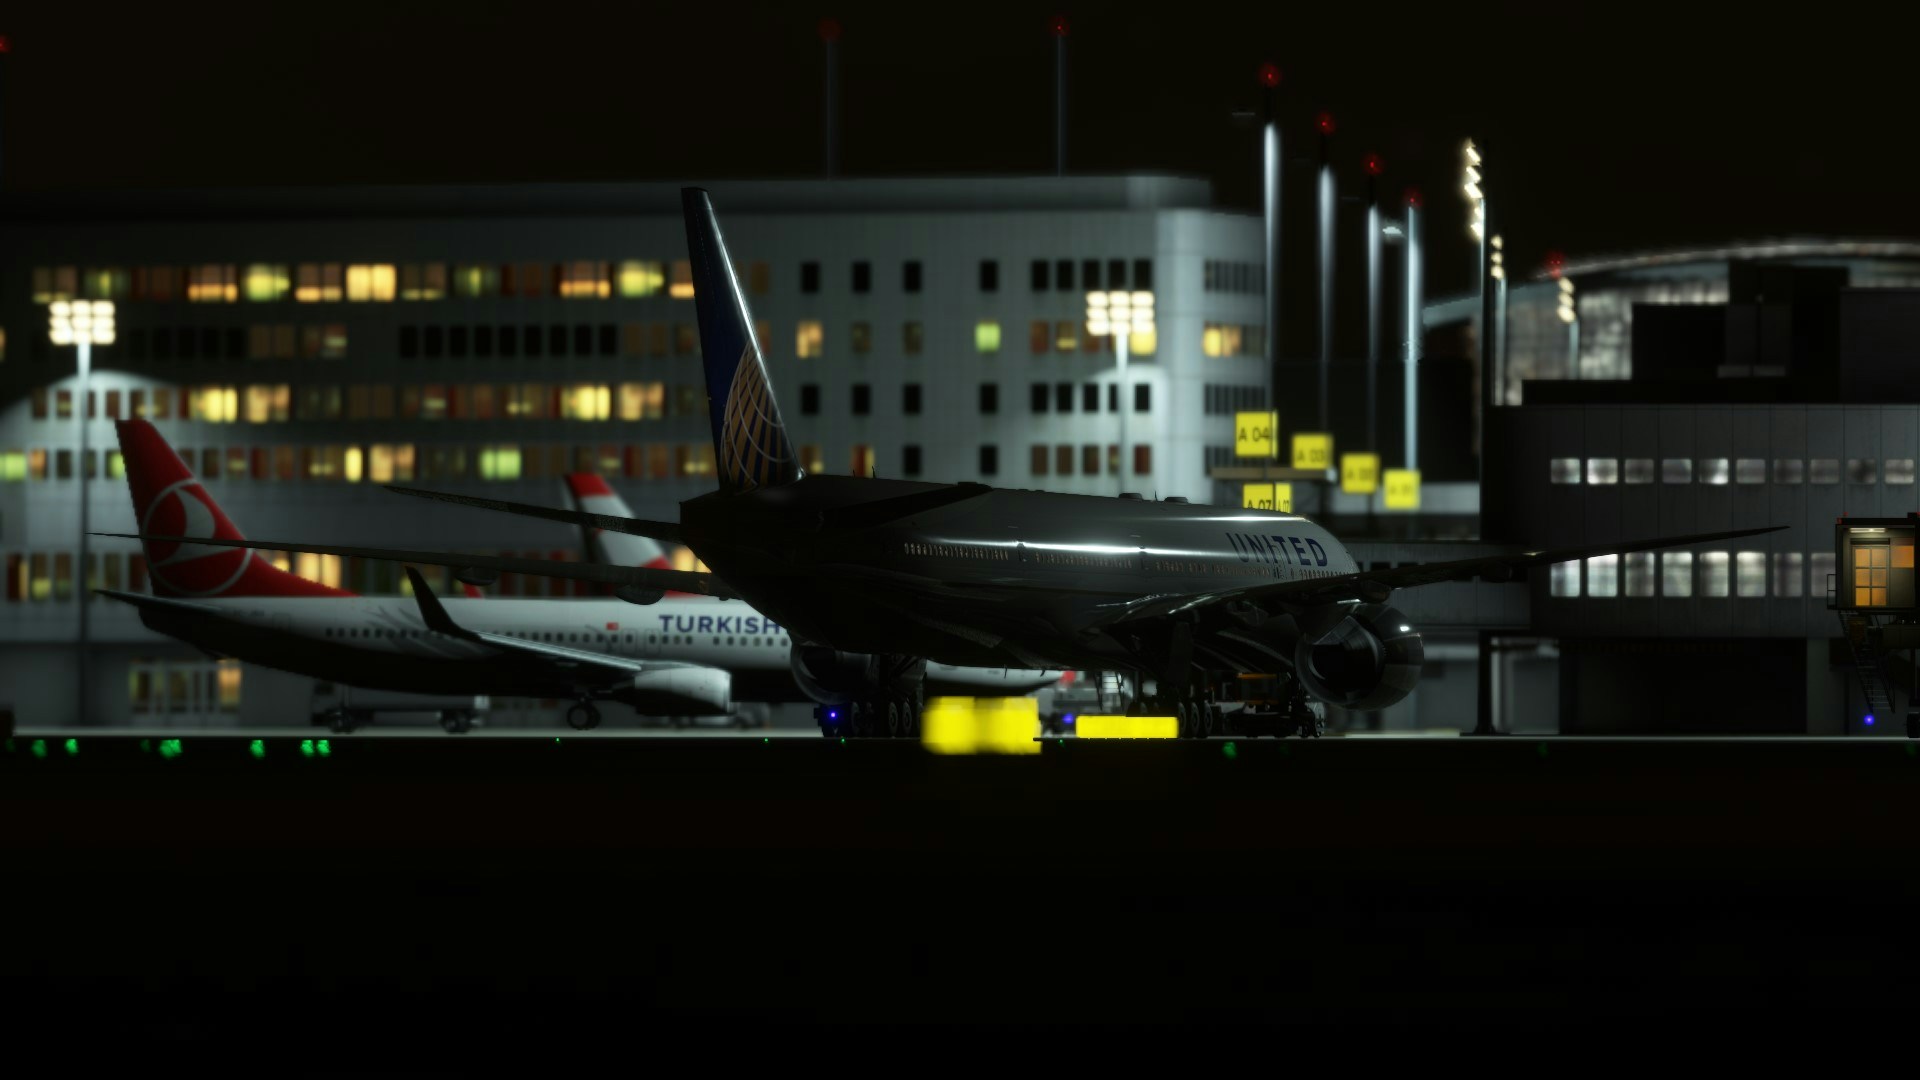 2 airliners parked on stand at night